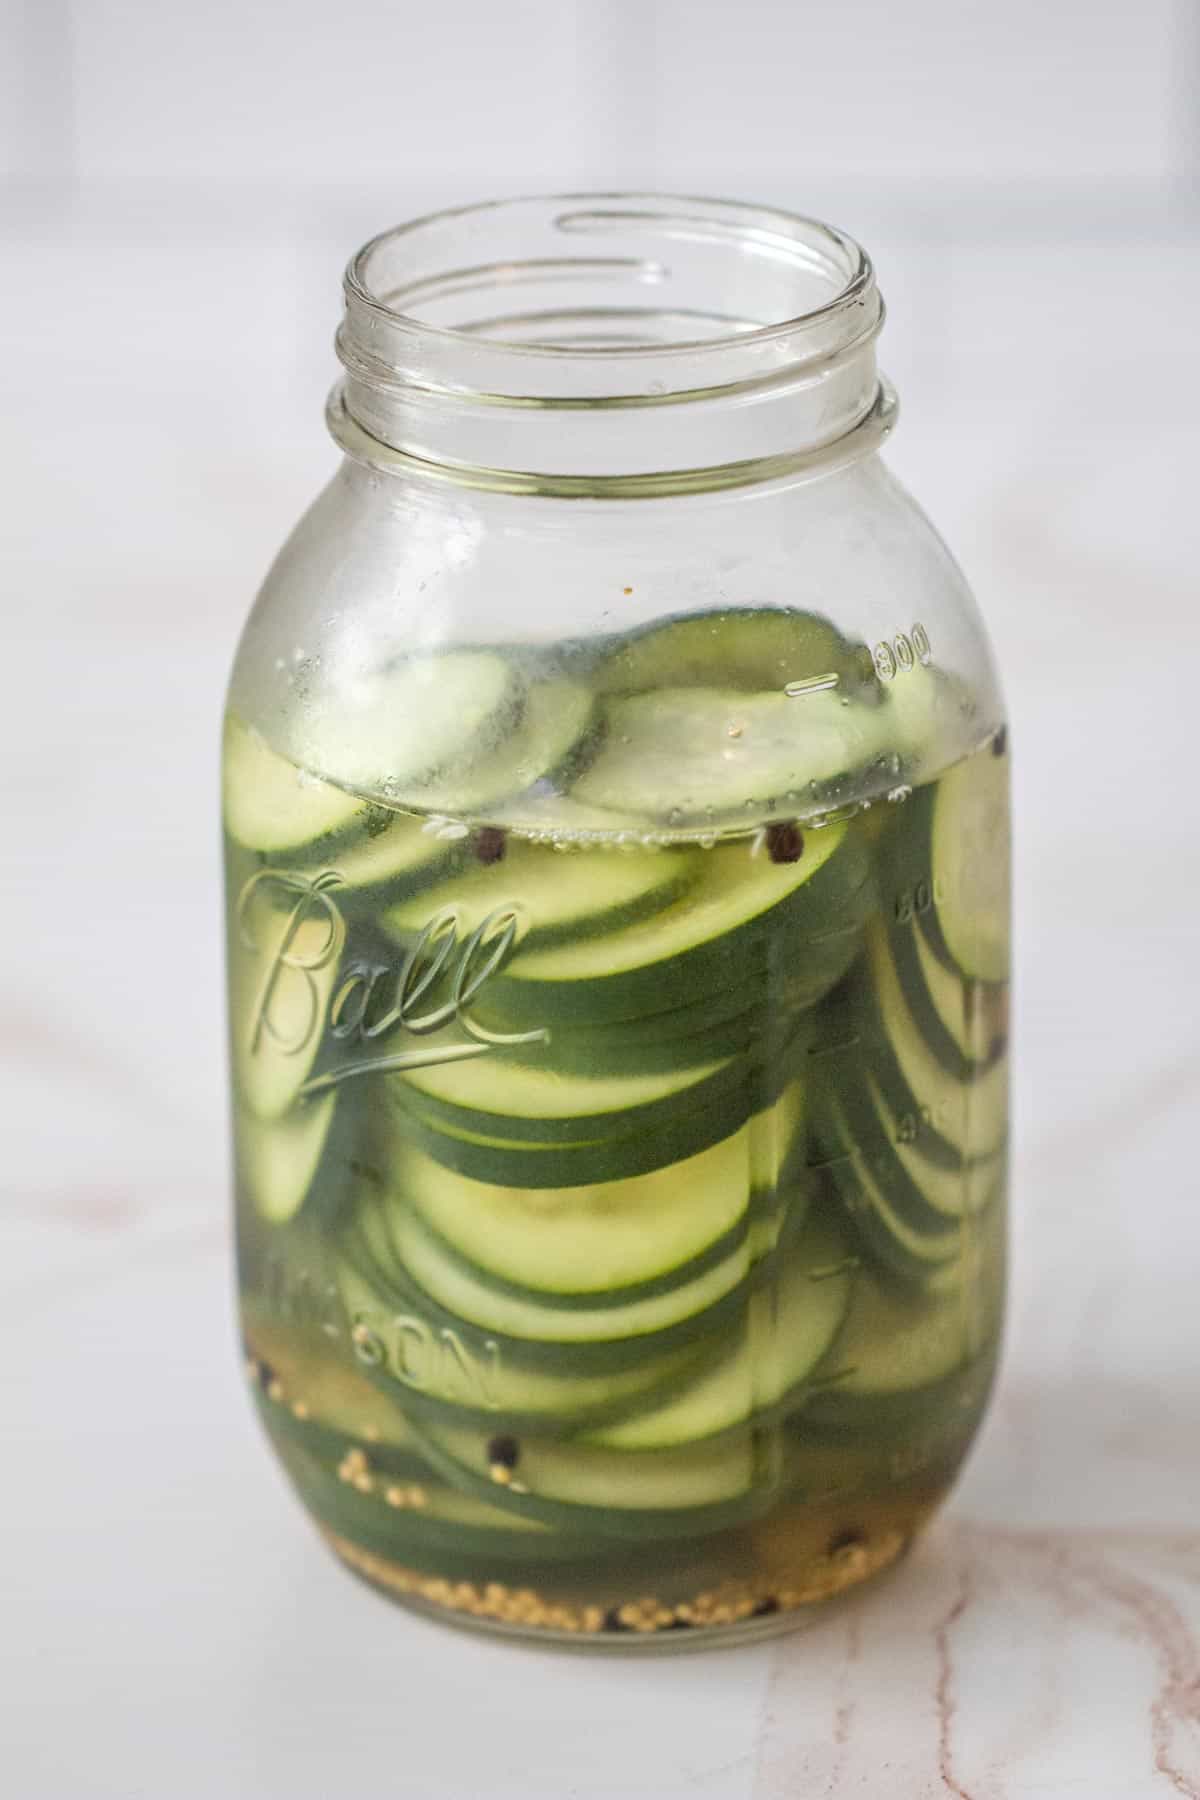 Spicy Lightly Pickled Cucumbers Recipe